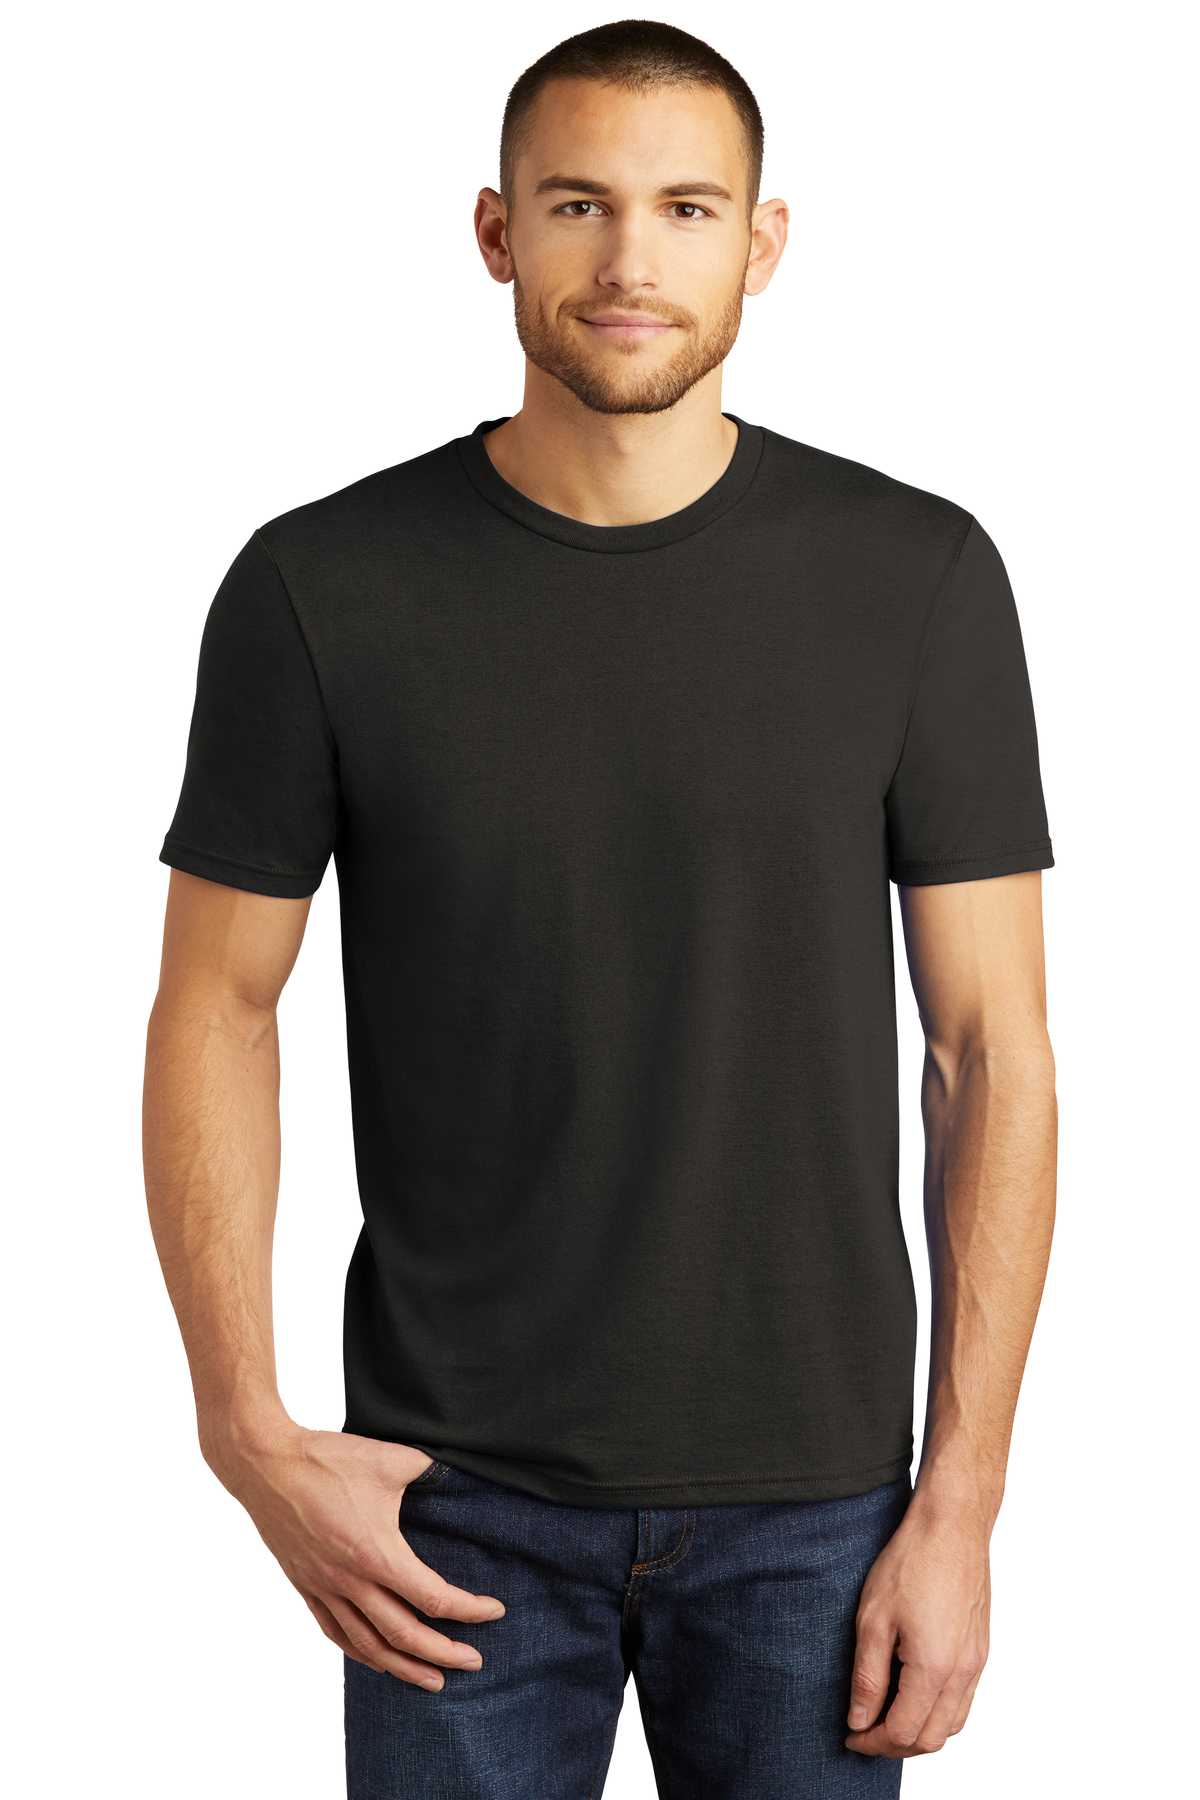 District Printed Men's Perfect TriBlend Tee | T-Shirts - Queensboro